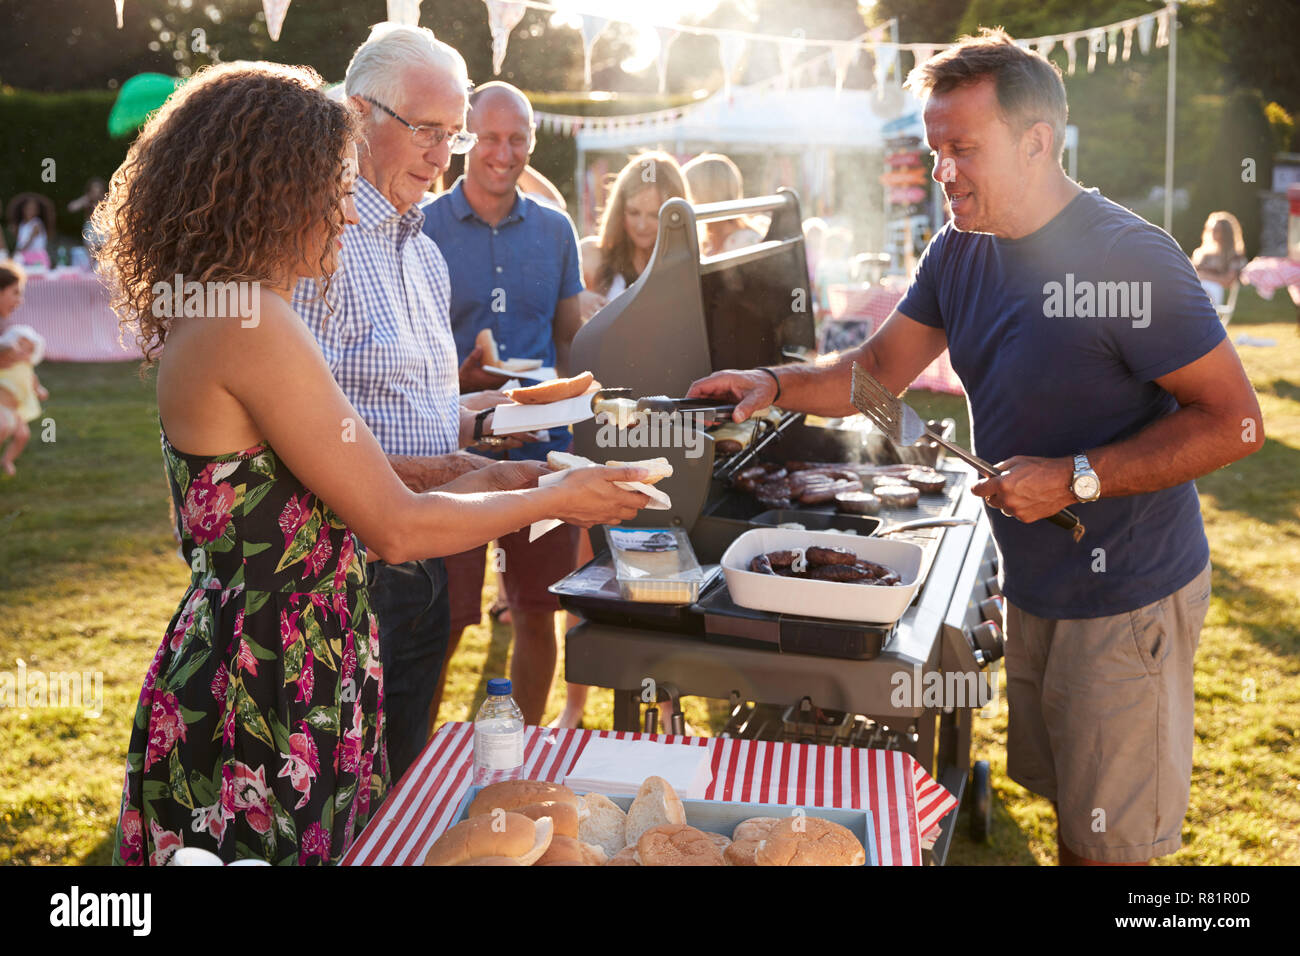 Man Serving On Barbeque Stall At Summer Garden Fete Stock Photo